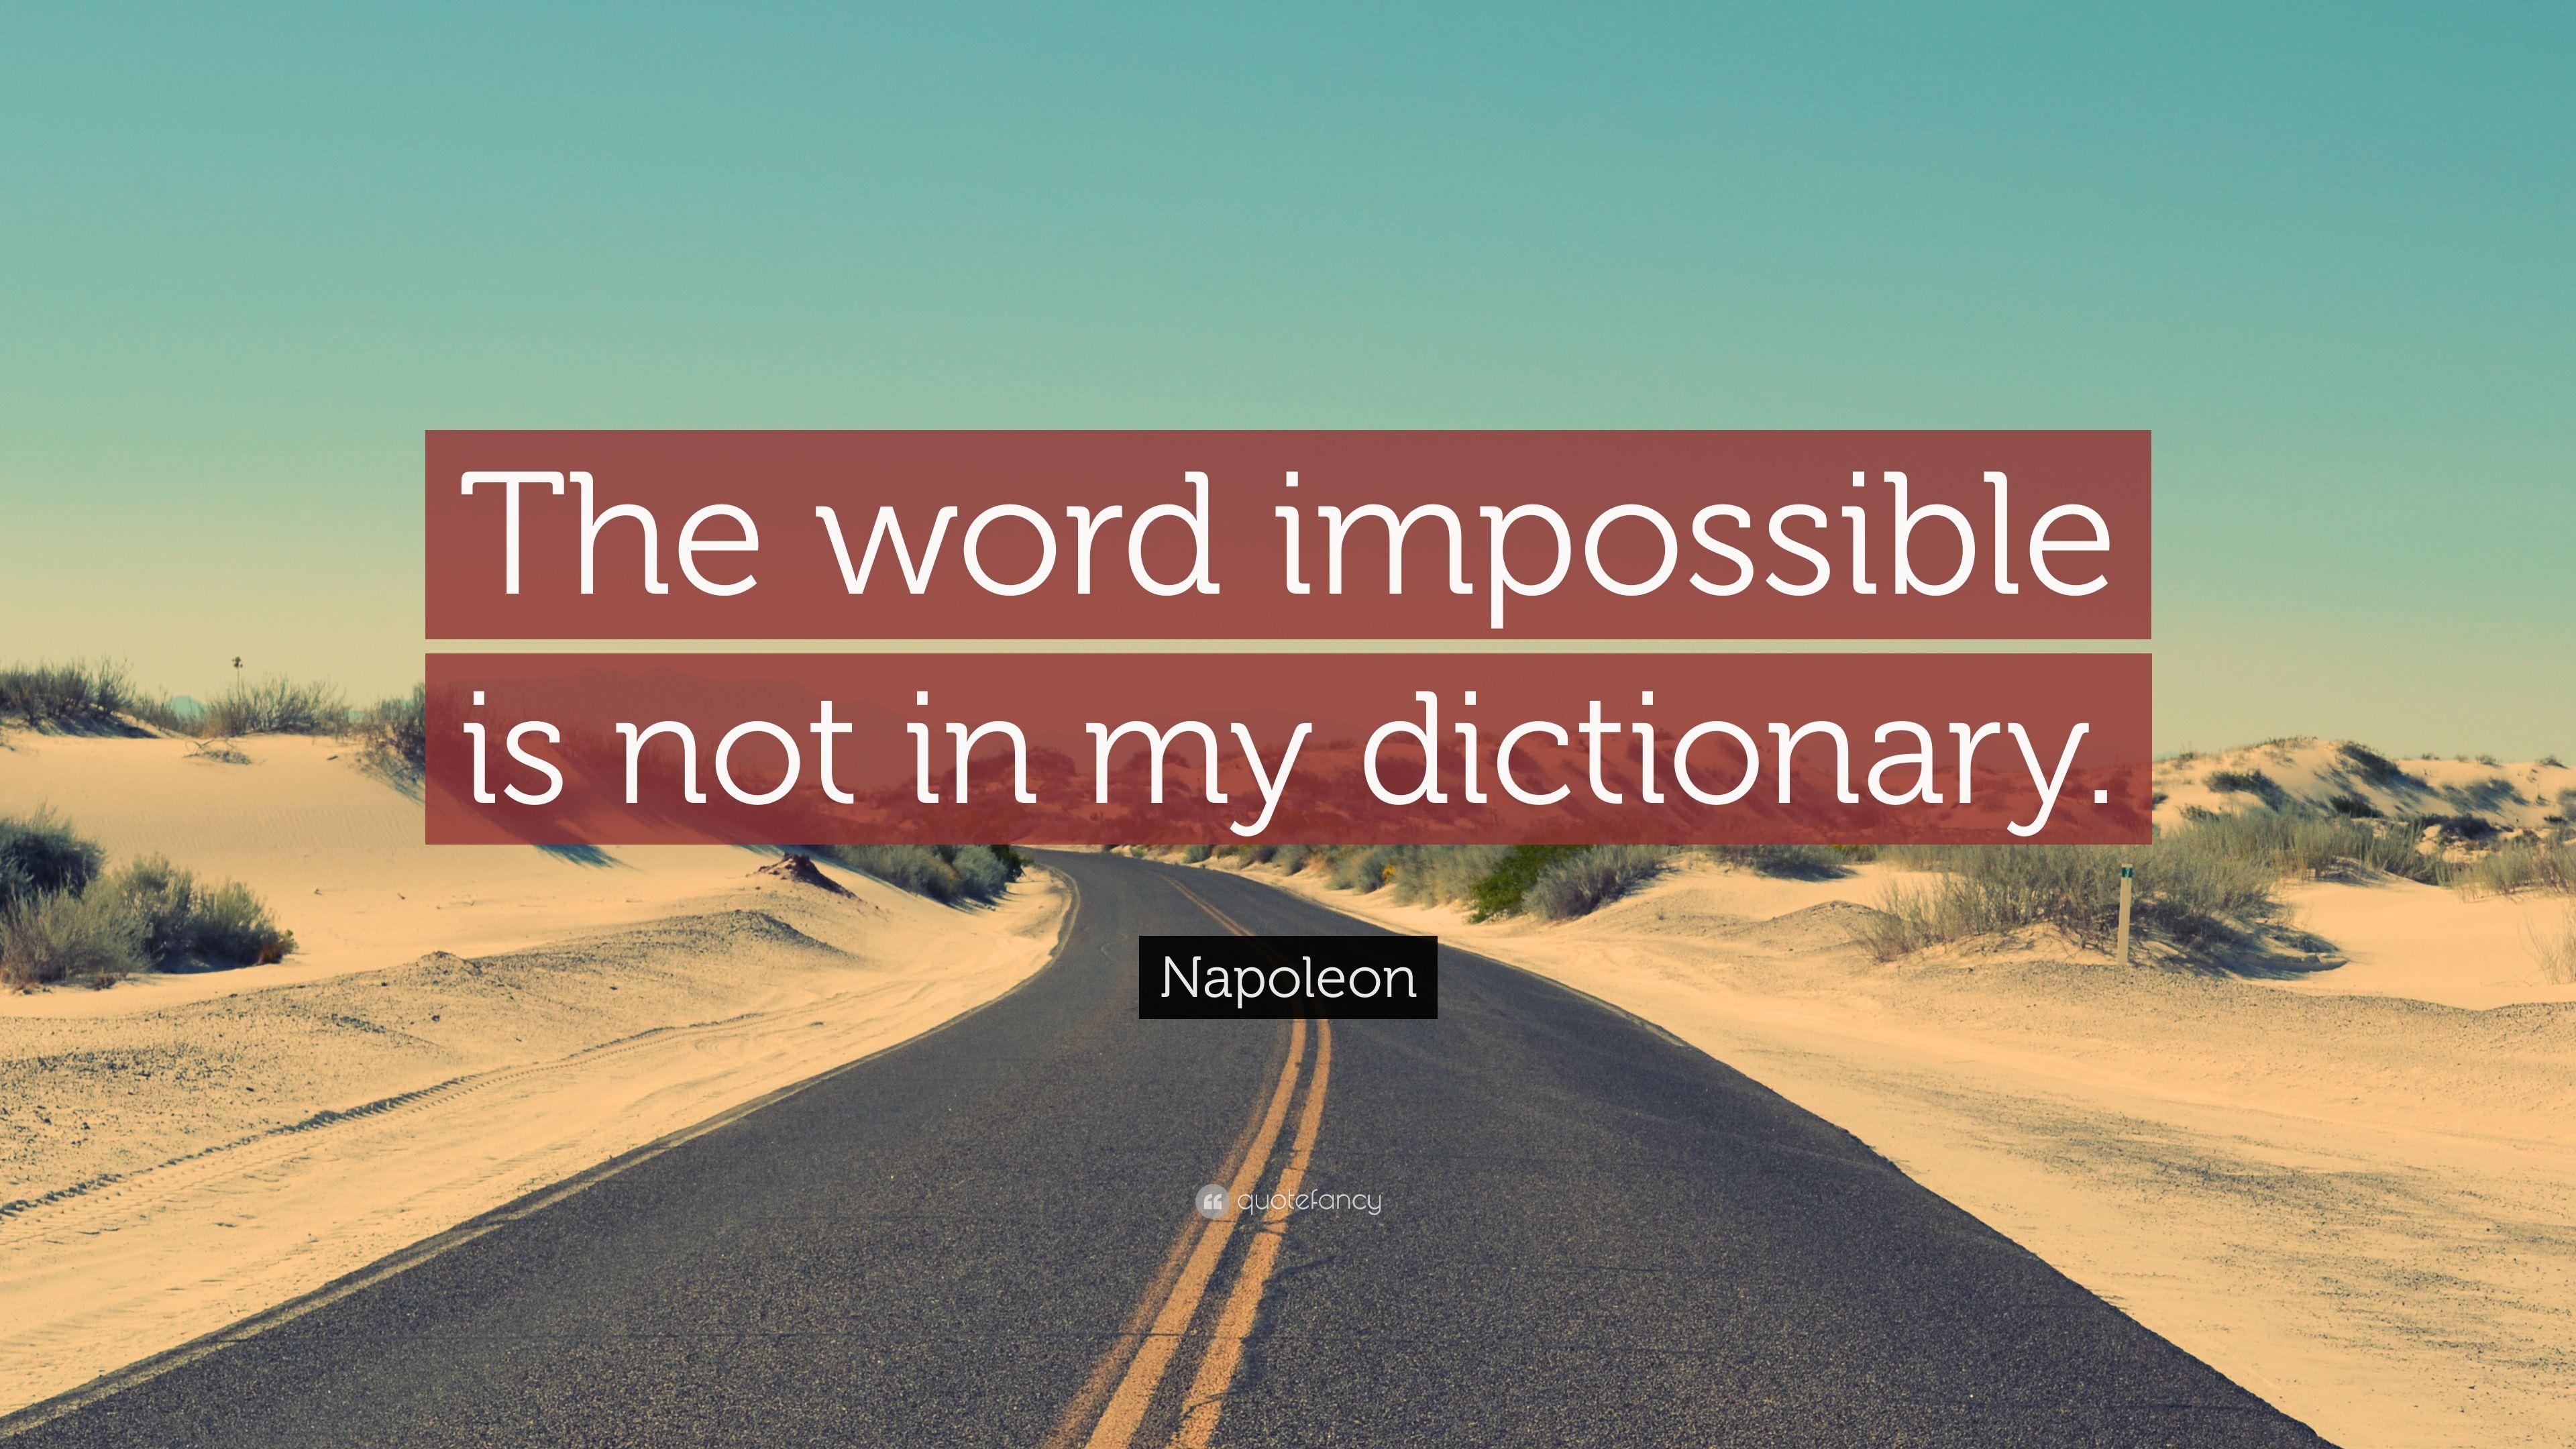 Napoleon Quote: “The word impossible is not in my dictionary.” 12